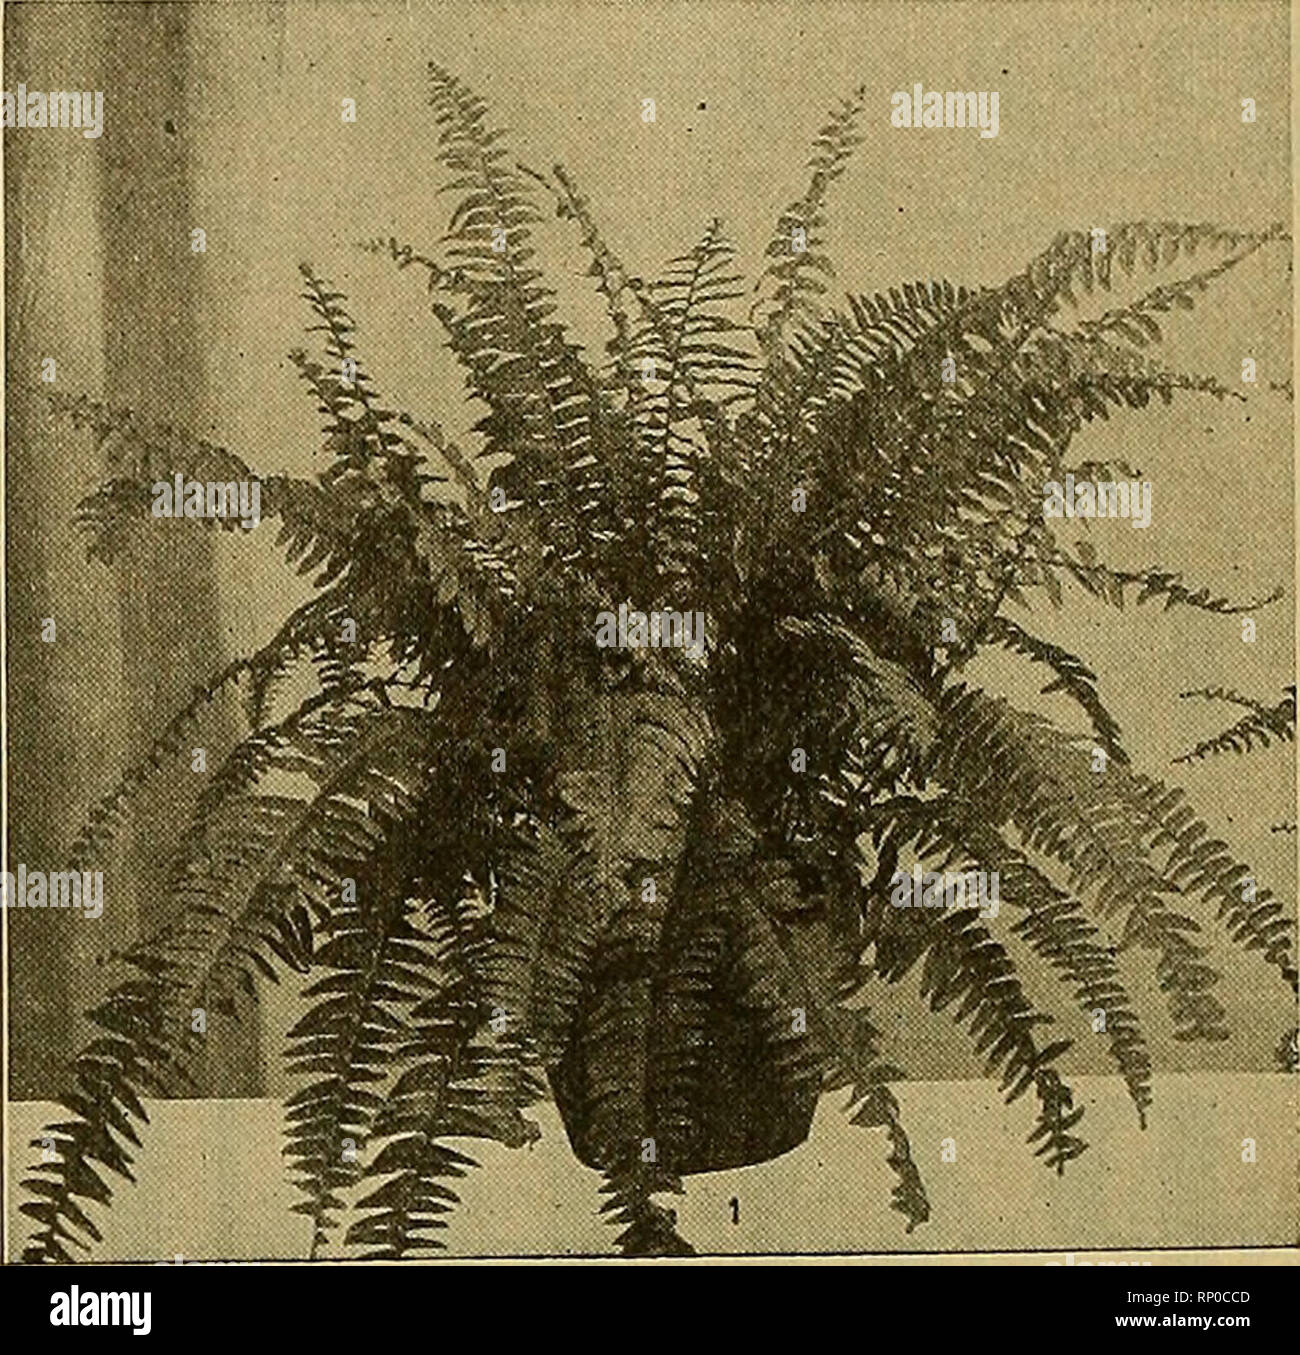 . The American florist : a weekly journal for the trade. Floriculture; Florists. 428 The American Florist. Sept. 9^ BOSTON FERNS Large Stock of Fine Plants 4-inch, at $ 1.50 per dozen 5-inch, at 3.00 per dozen 6-inch, at 6.00 per dozen 7-inch, at 9.00 per dozen 8-inch, at 12.00 per dozen 9-inch, at 15.00 per dozen Extra Special—$1.50 We have a very fine lot of 9-in. Boston Ferns at the above price. These are very beautiful specimens.. The George Wittbold Co. 737 Buckingham Place, LONG DISTANCE PHONE: GRACELAND 1112 CHICAGO, ILL. BELLE WASHBIRN BEST RED CARNATION Field plants, all strictly firs Stock Photo